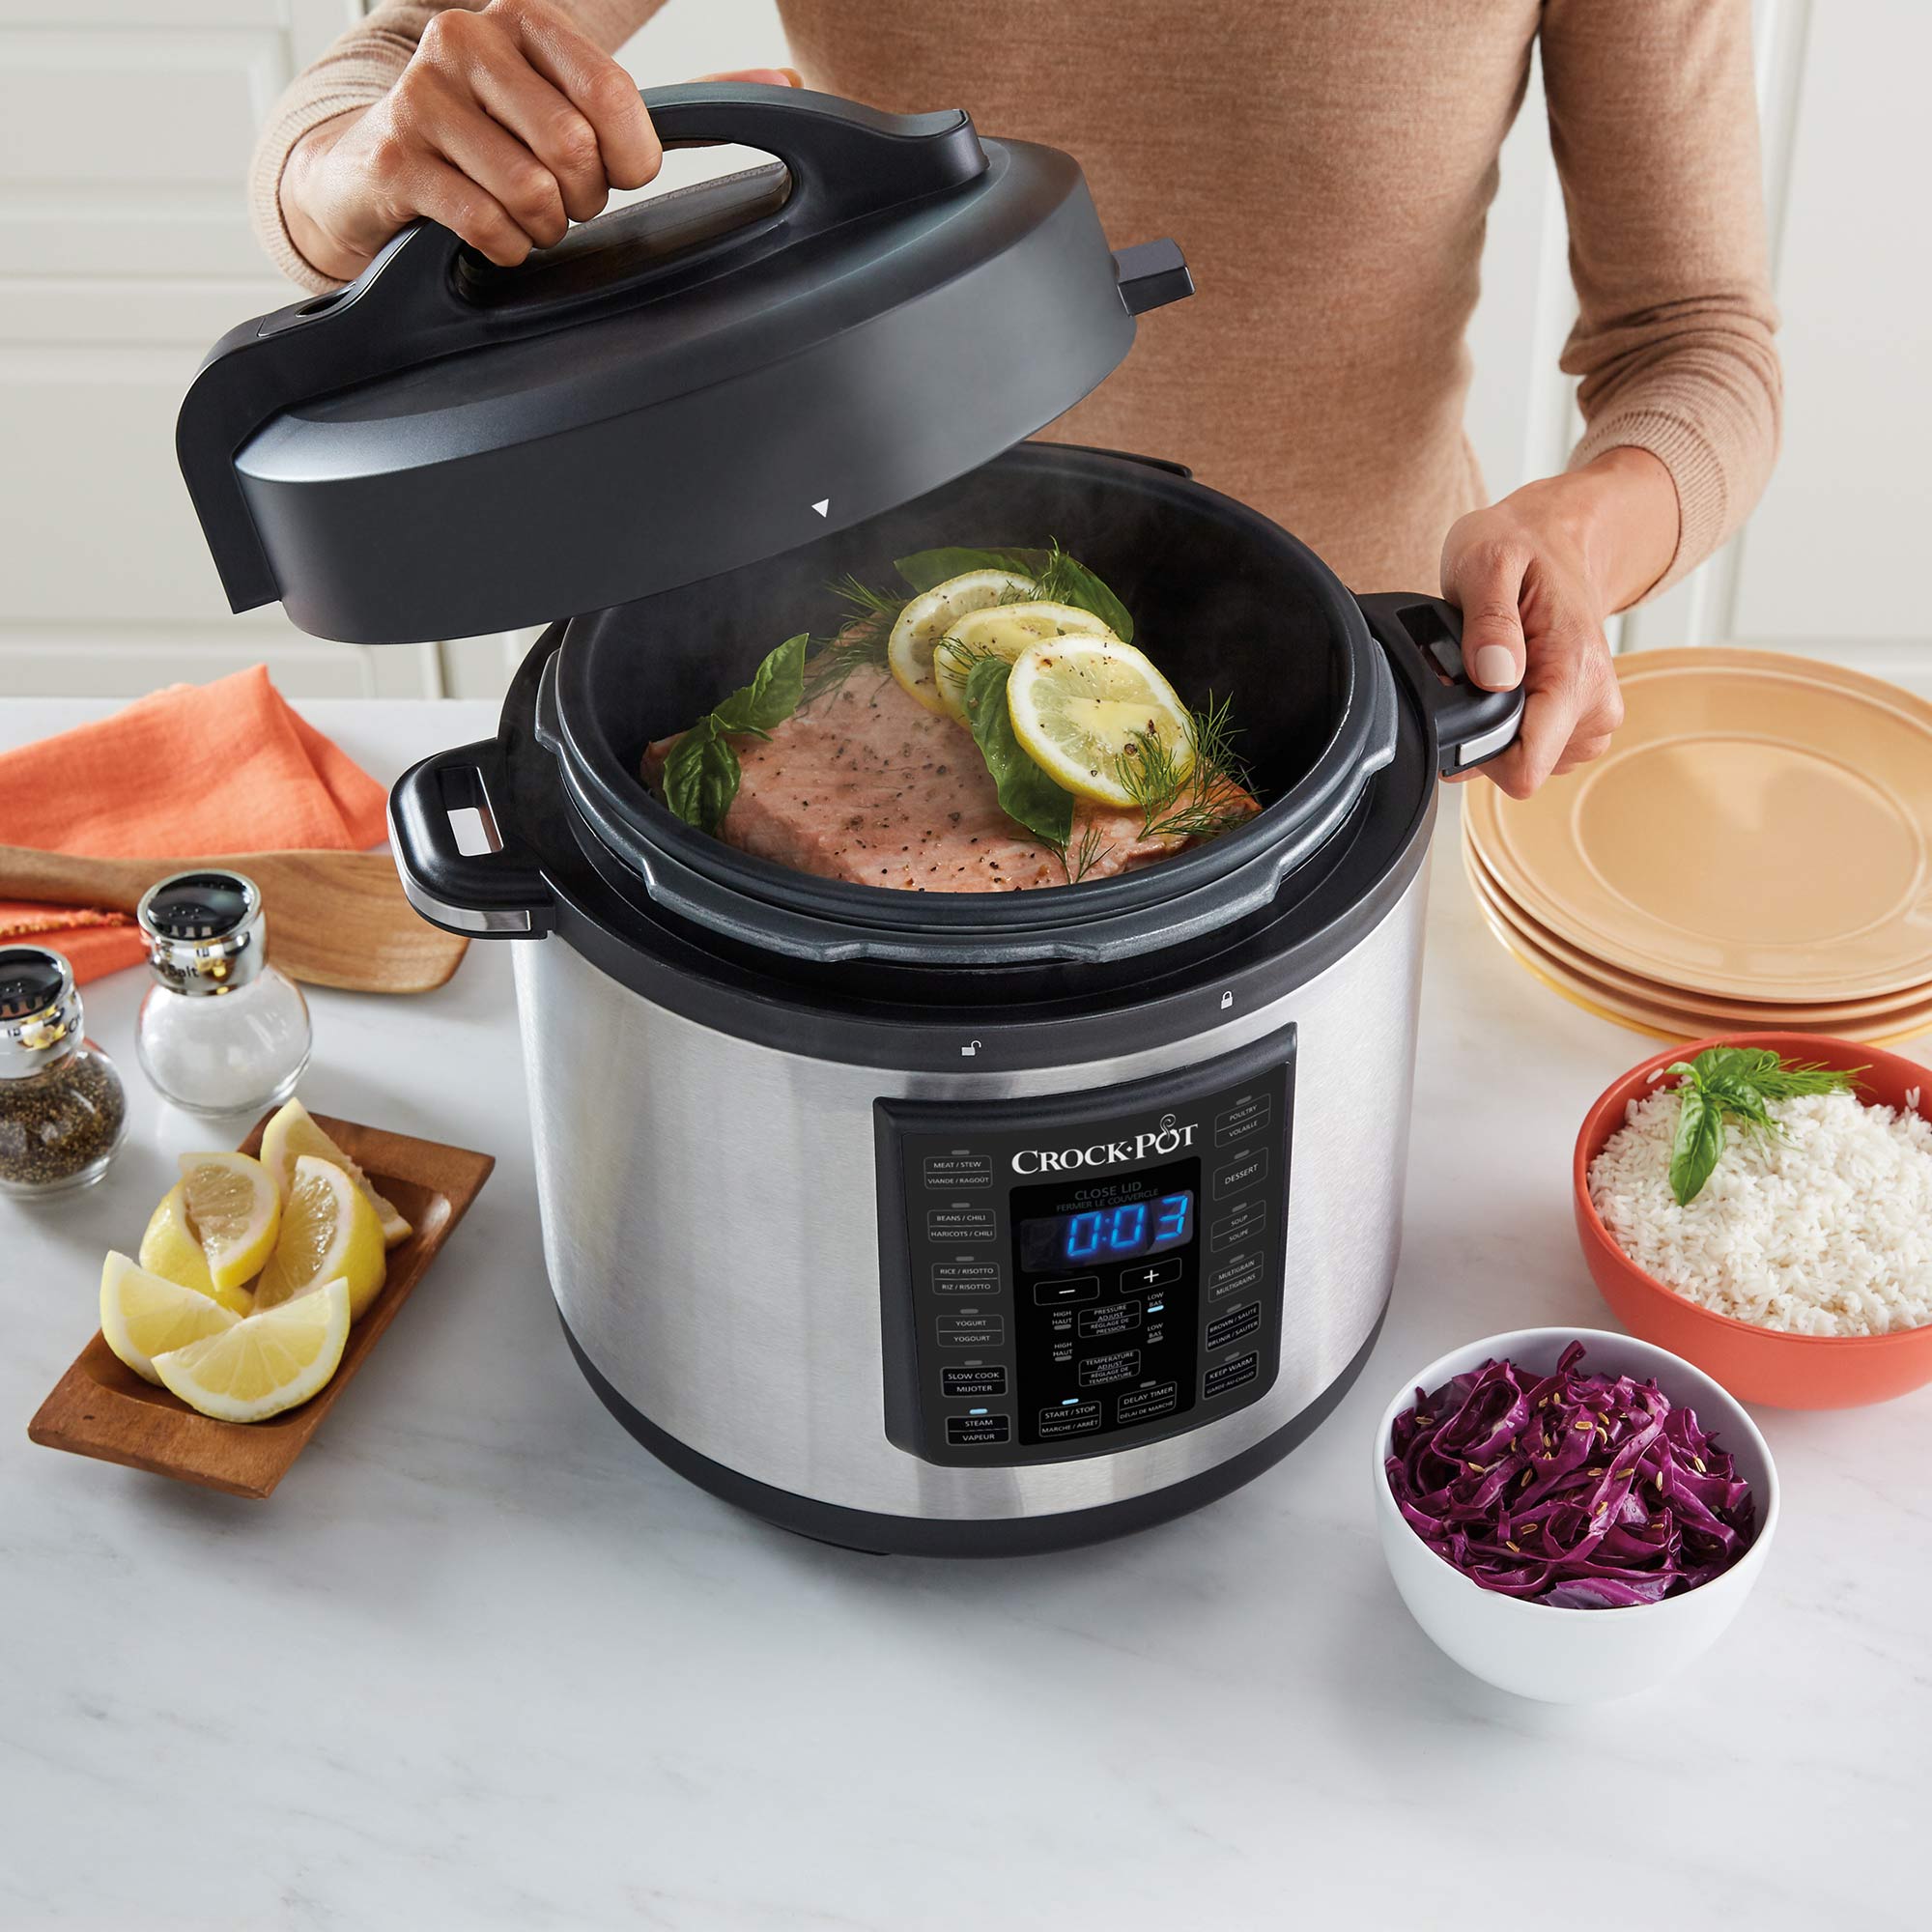 Crock-Pot 6 Qt 8-in-1 Multi-Use Express Pressure Cooker, Stainless Steel - image 3 of 11